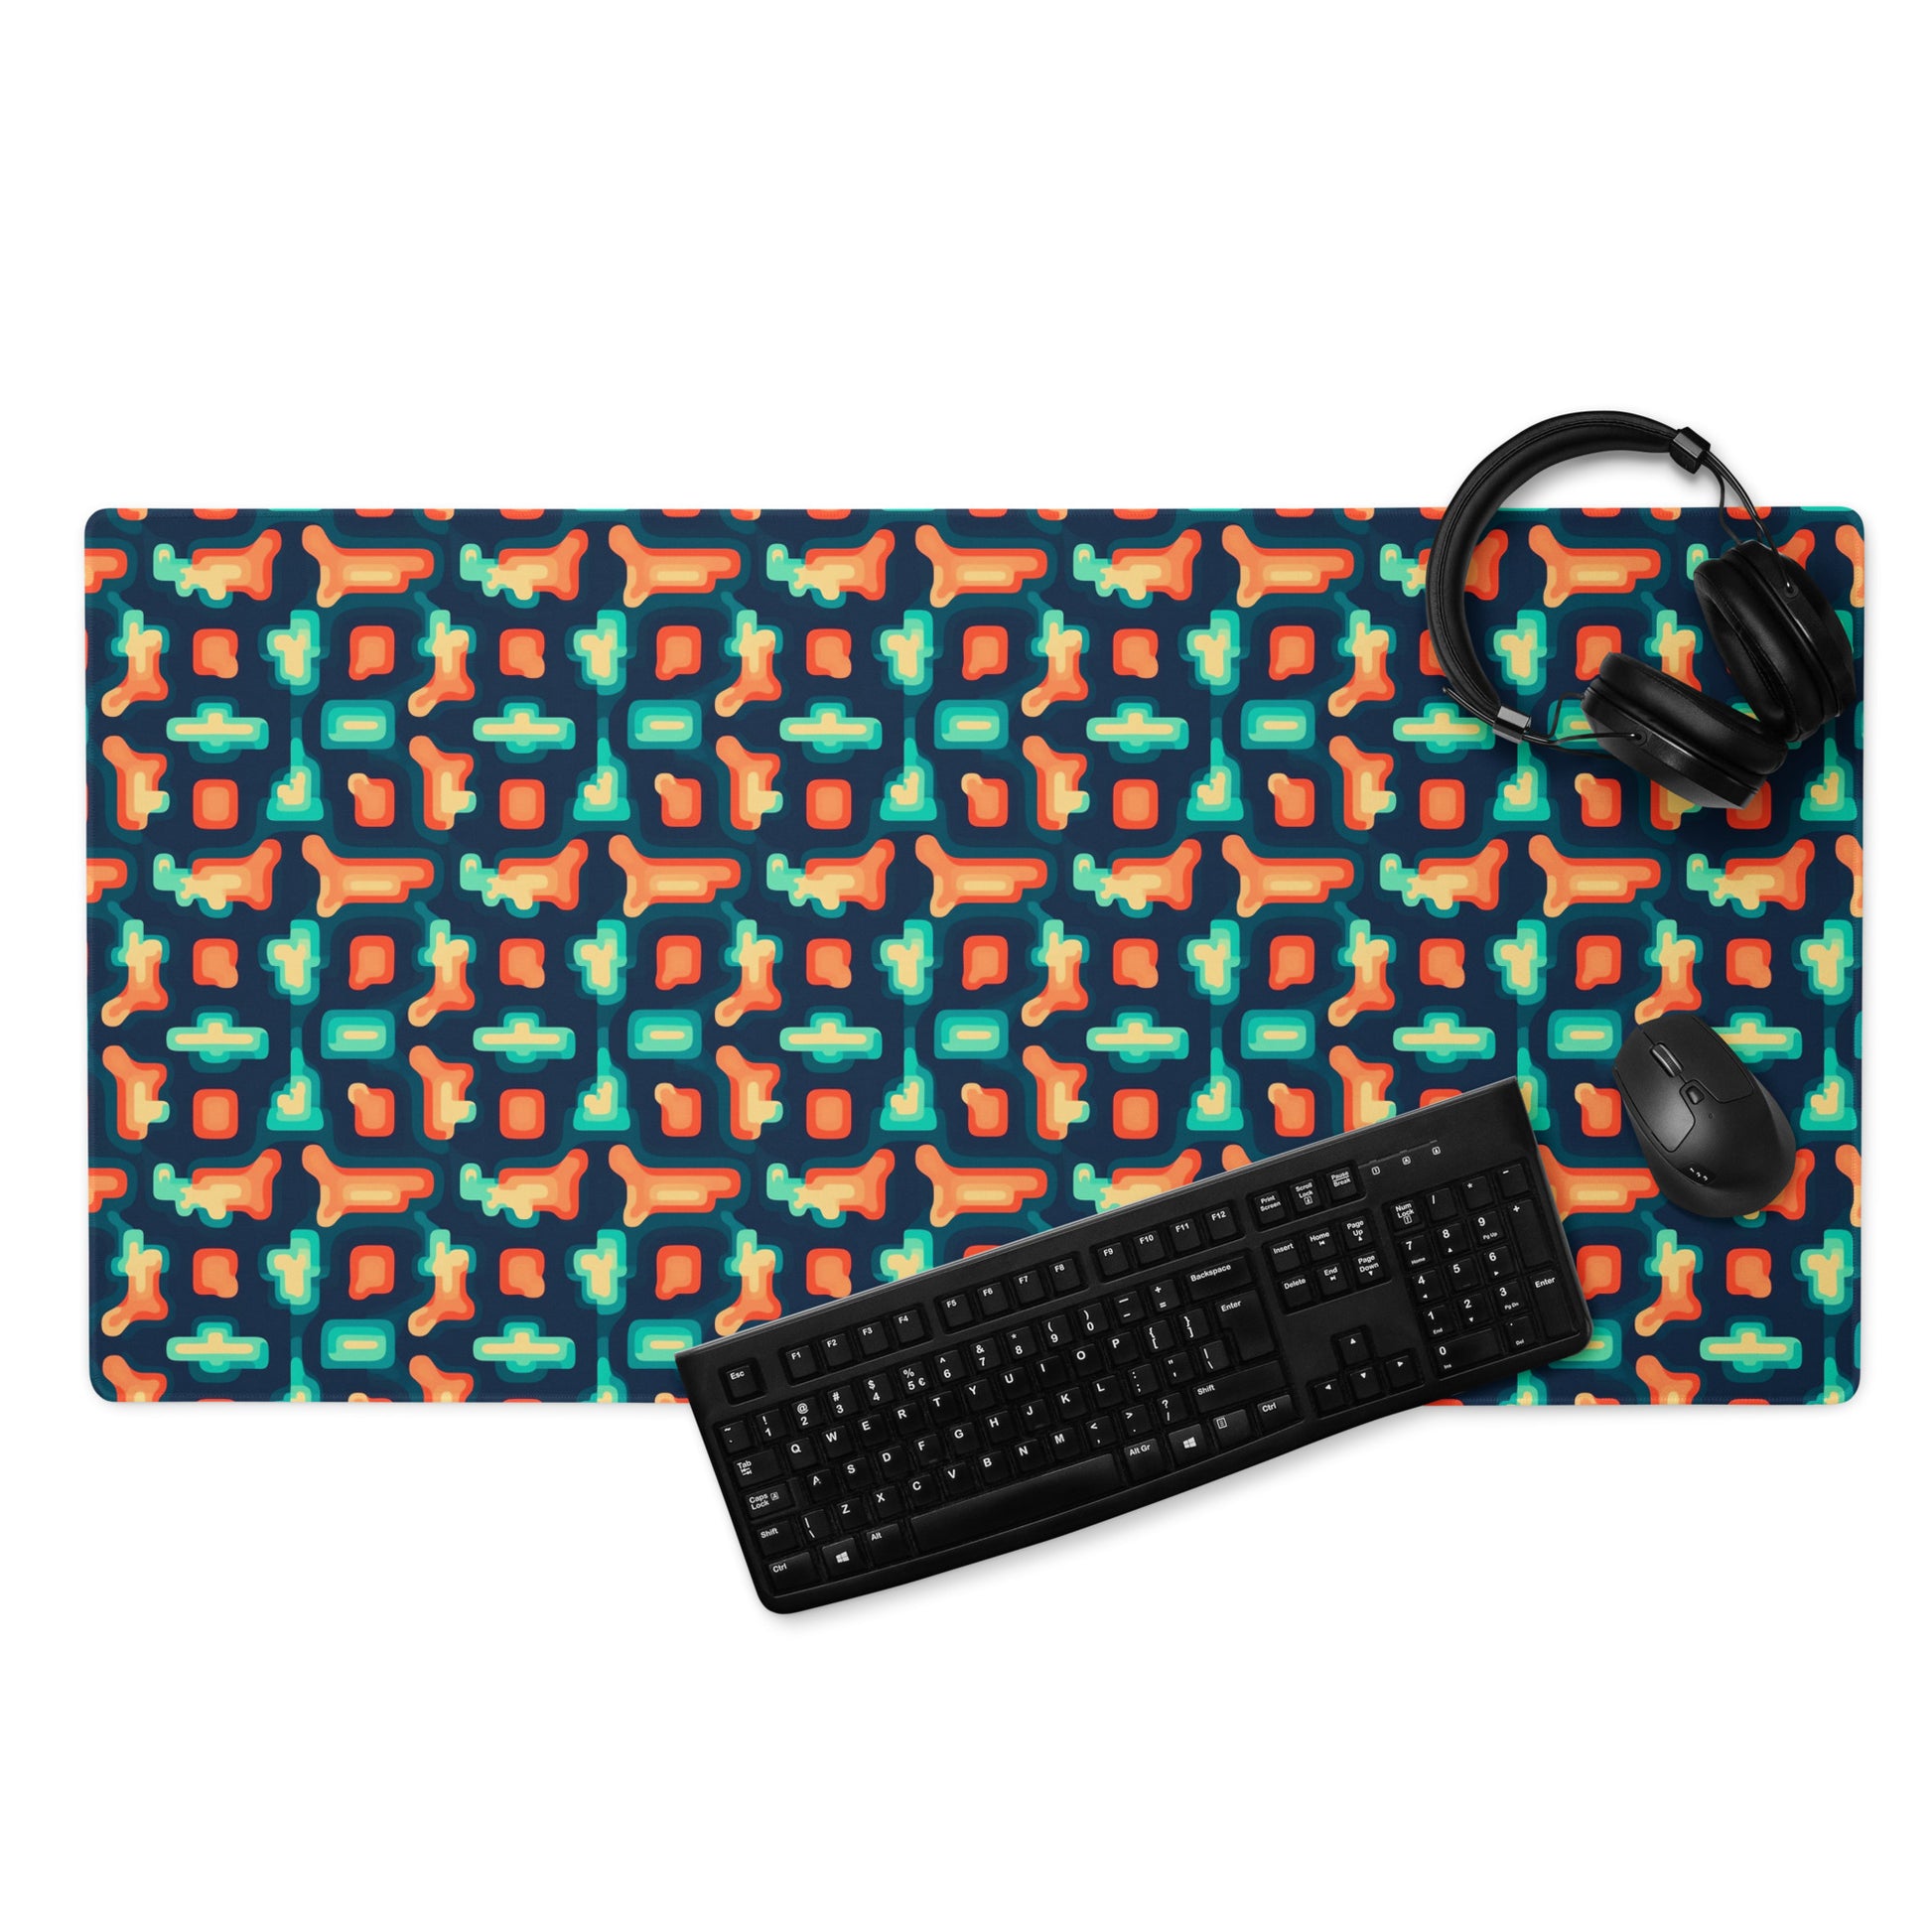 A 36" x 18" gaming desk pad with blue and orange puzzle pieces on a dark blue background. A keyboard, mouse, and headphones sit on it.